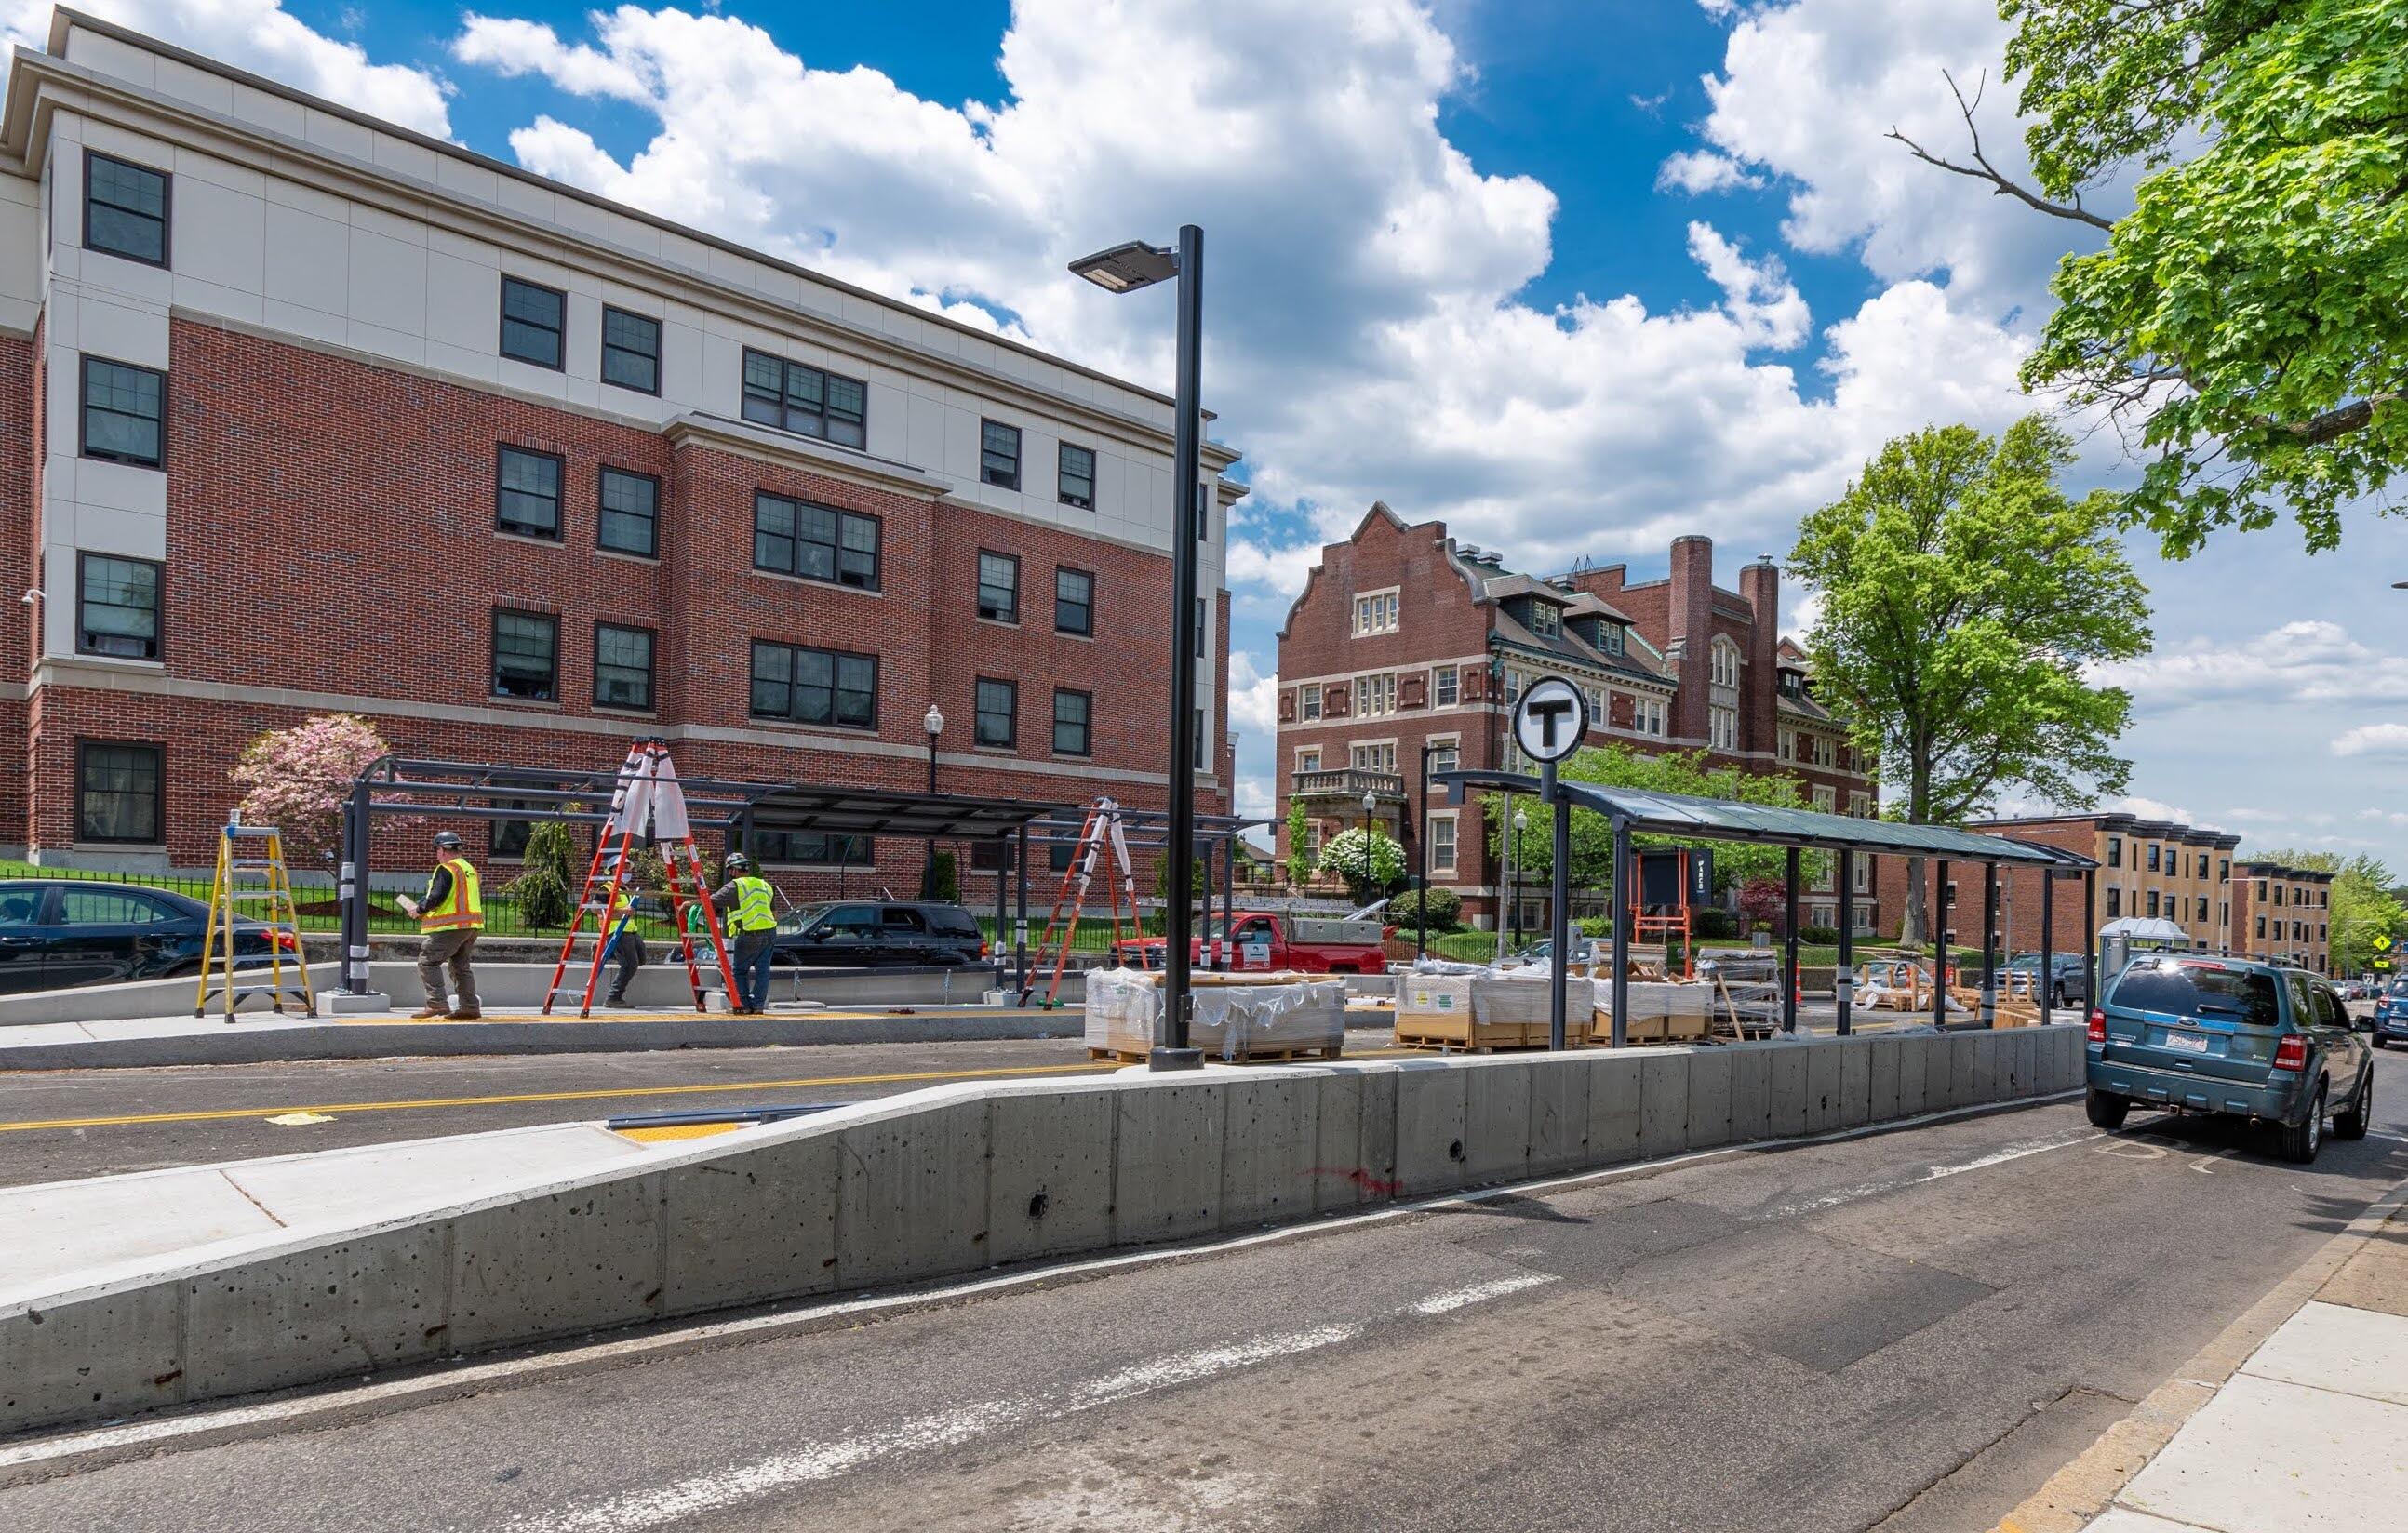 A newly completed canopy shelter on the Columbus Avenue center bus lane. Another canopy is under construction across the road.